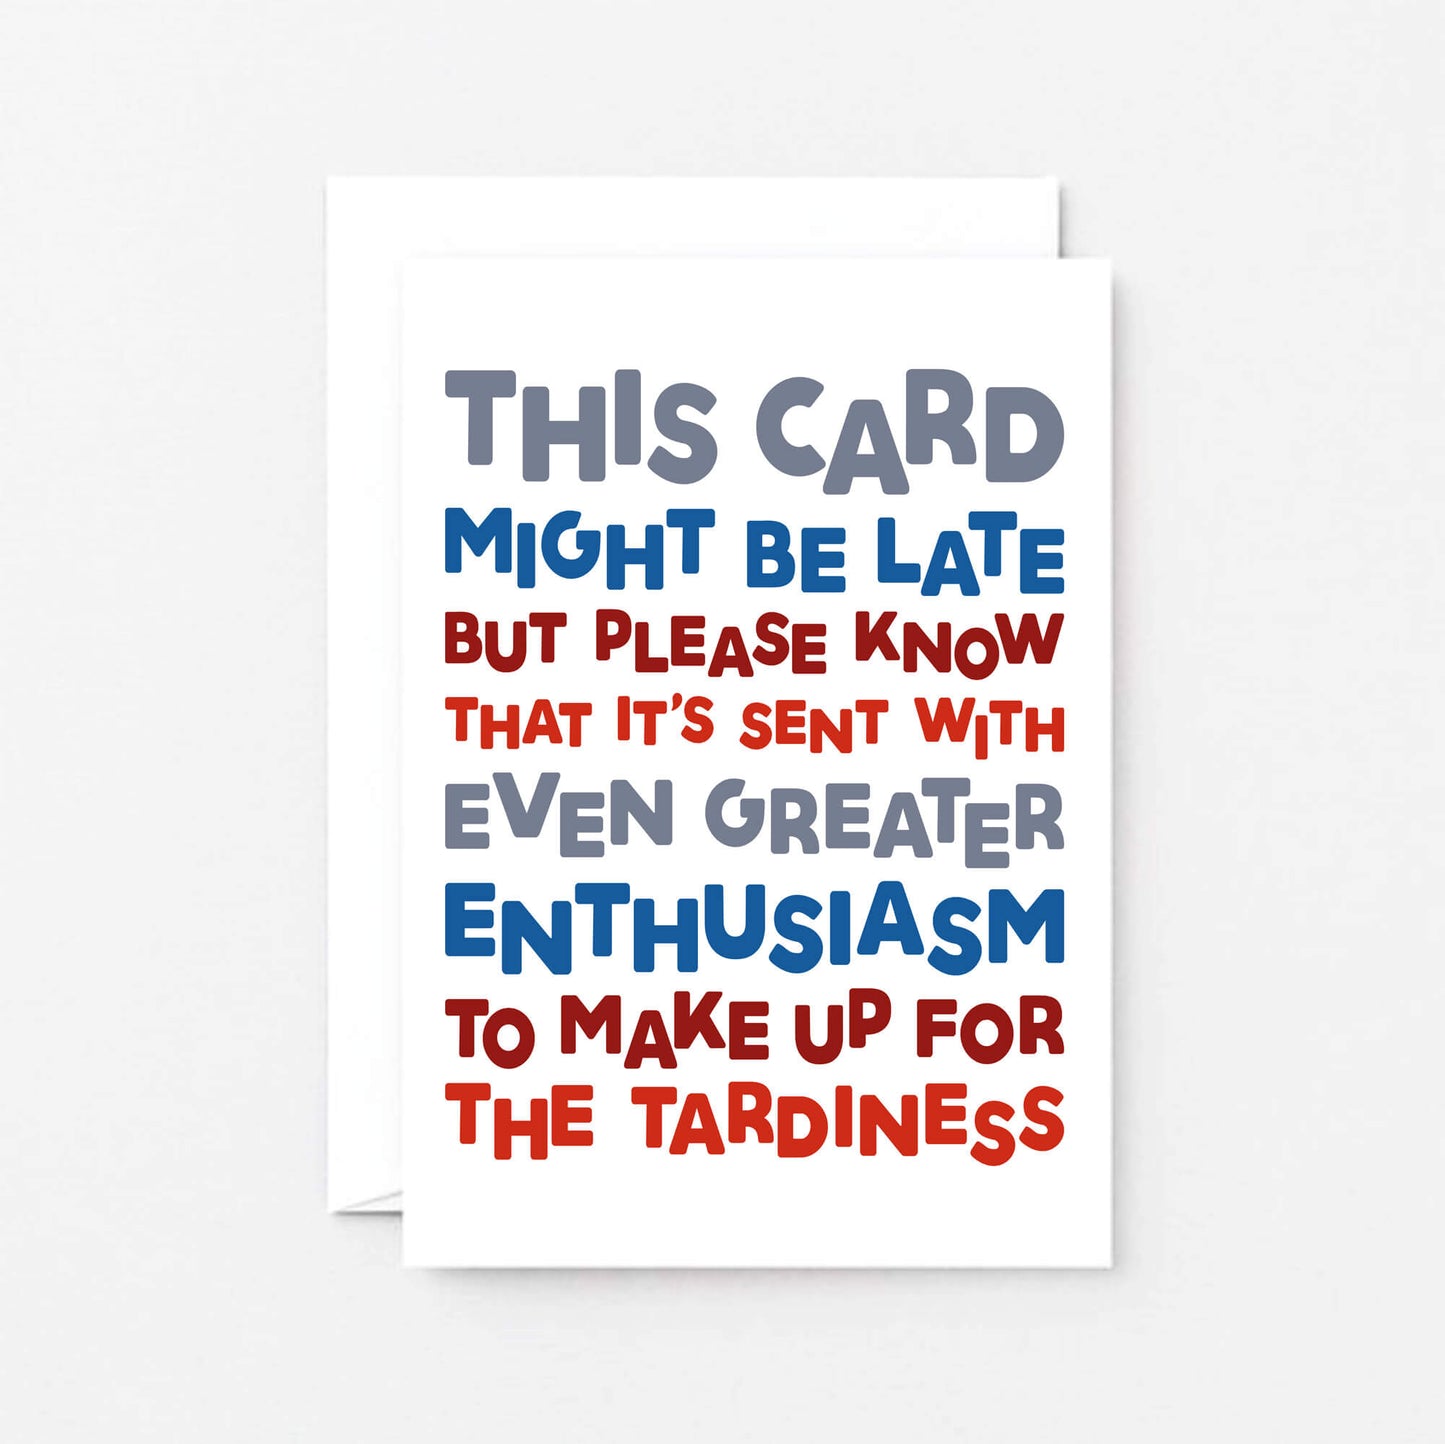 Belated Birthday Card by SixElevenCreations. Reads This card might be late but please know that it's sent with even greater enthusiasm to make up for the tardiness. Product Code SE0710A6